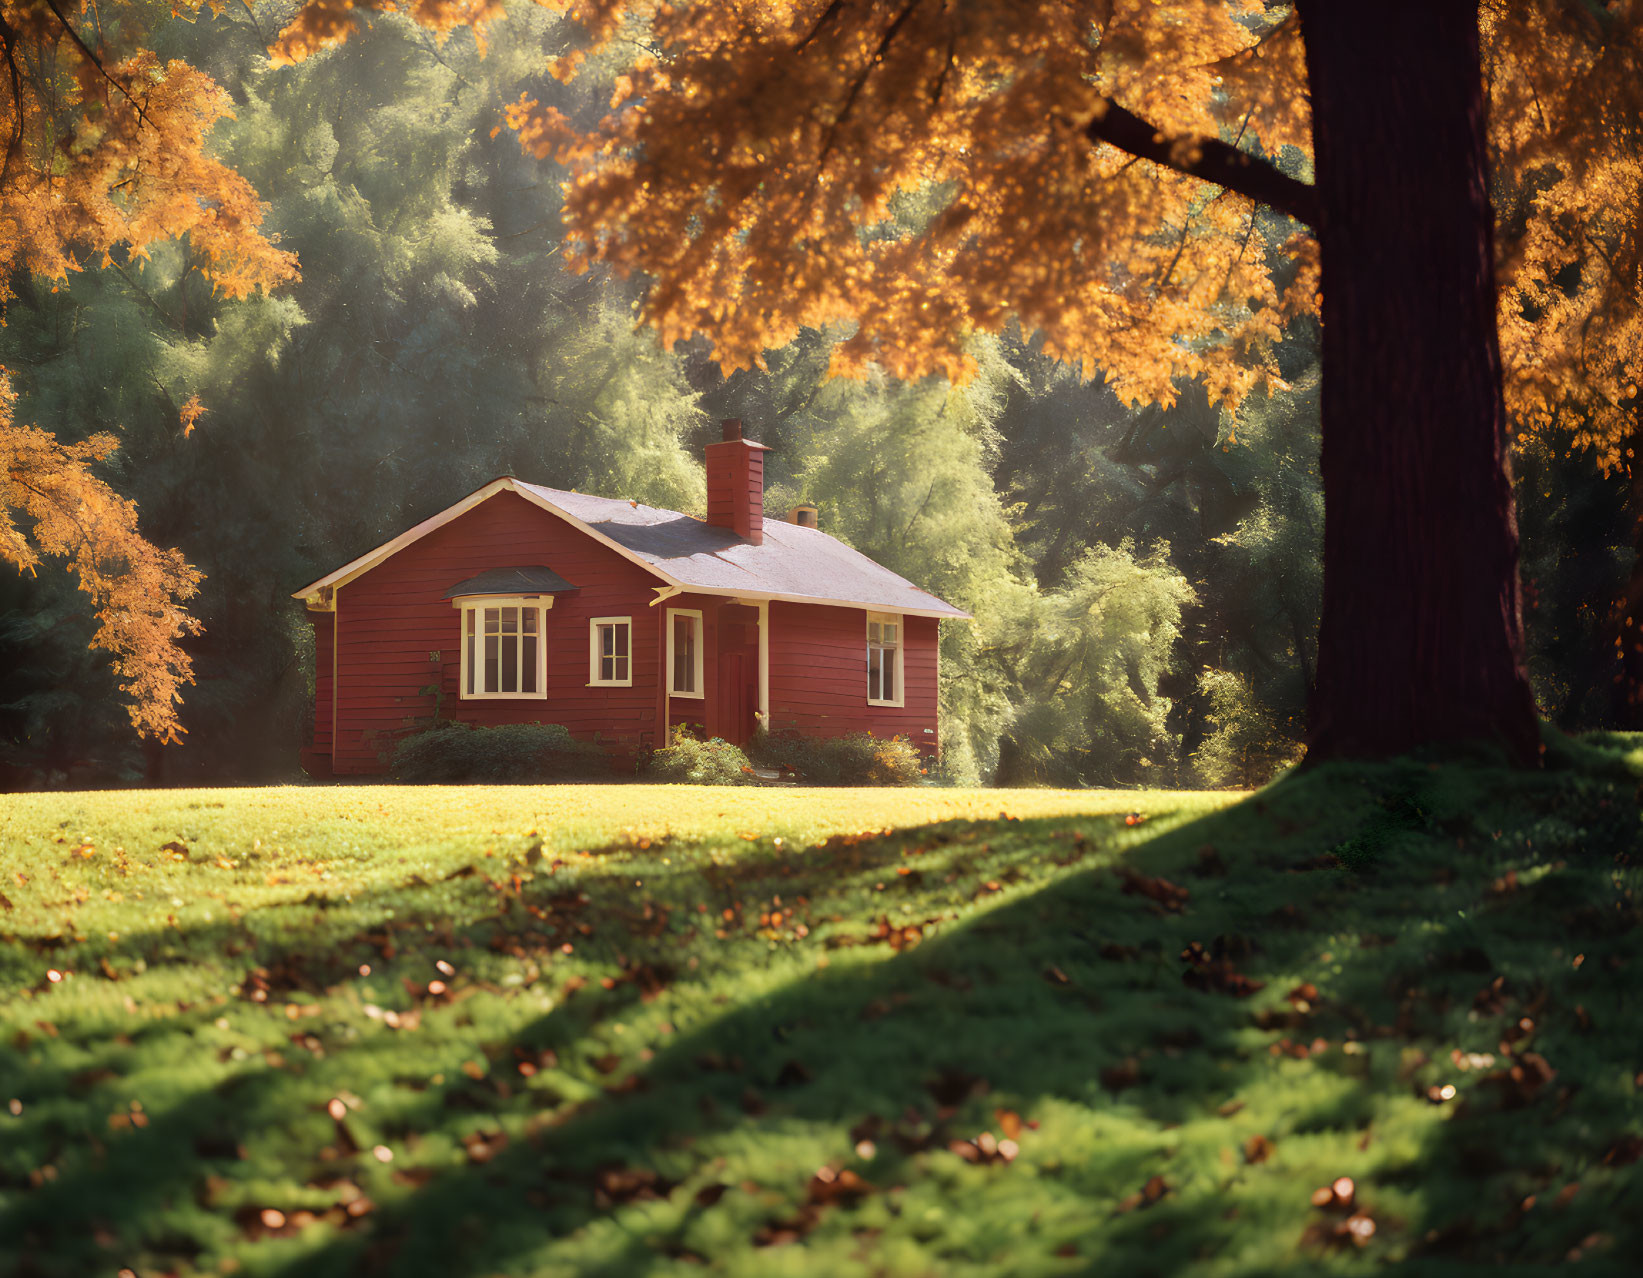 Red house with chimney in sunny clearing surrounded by autumn trees